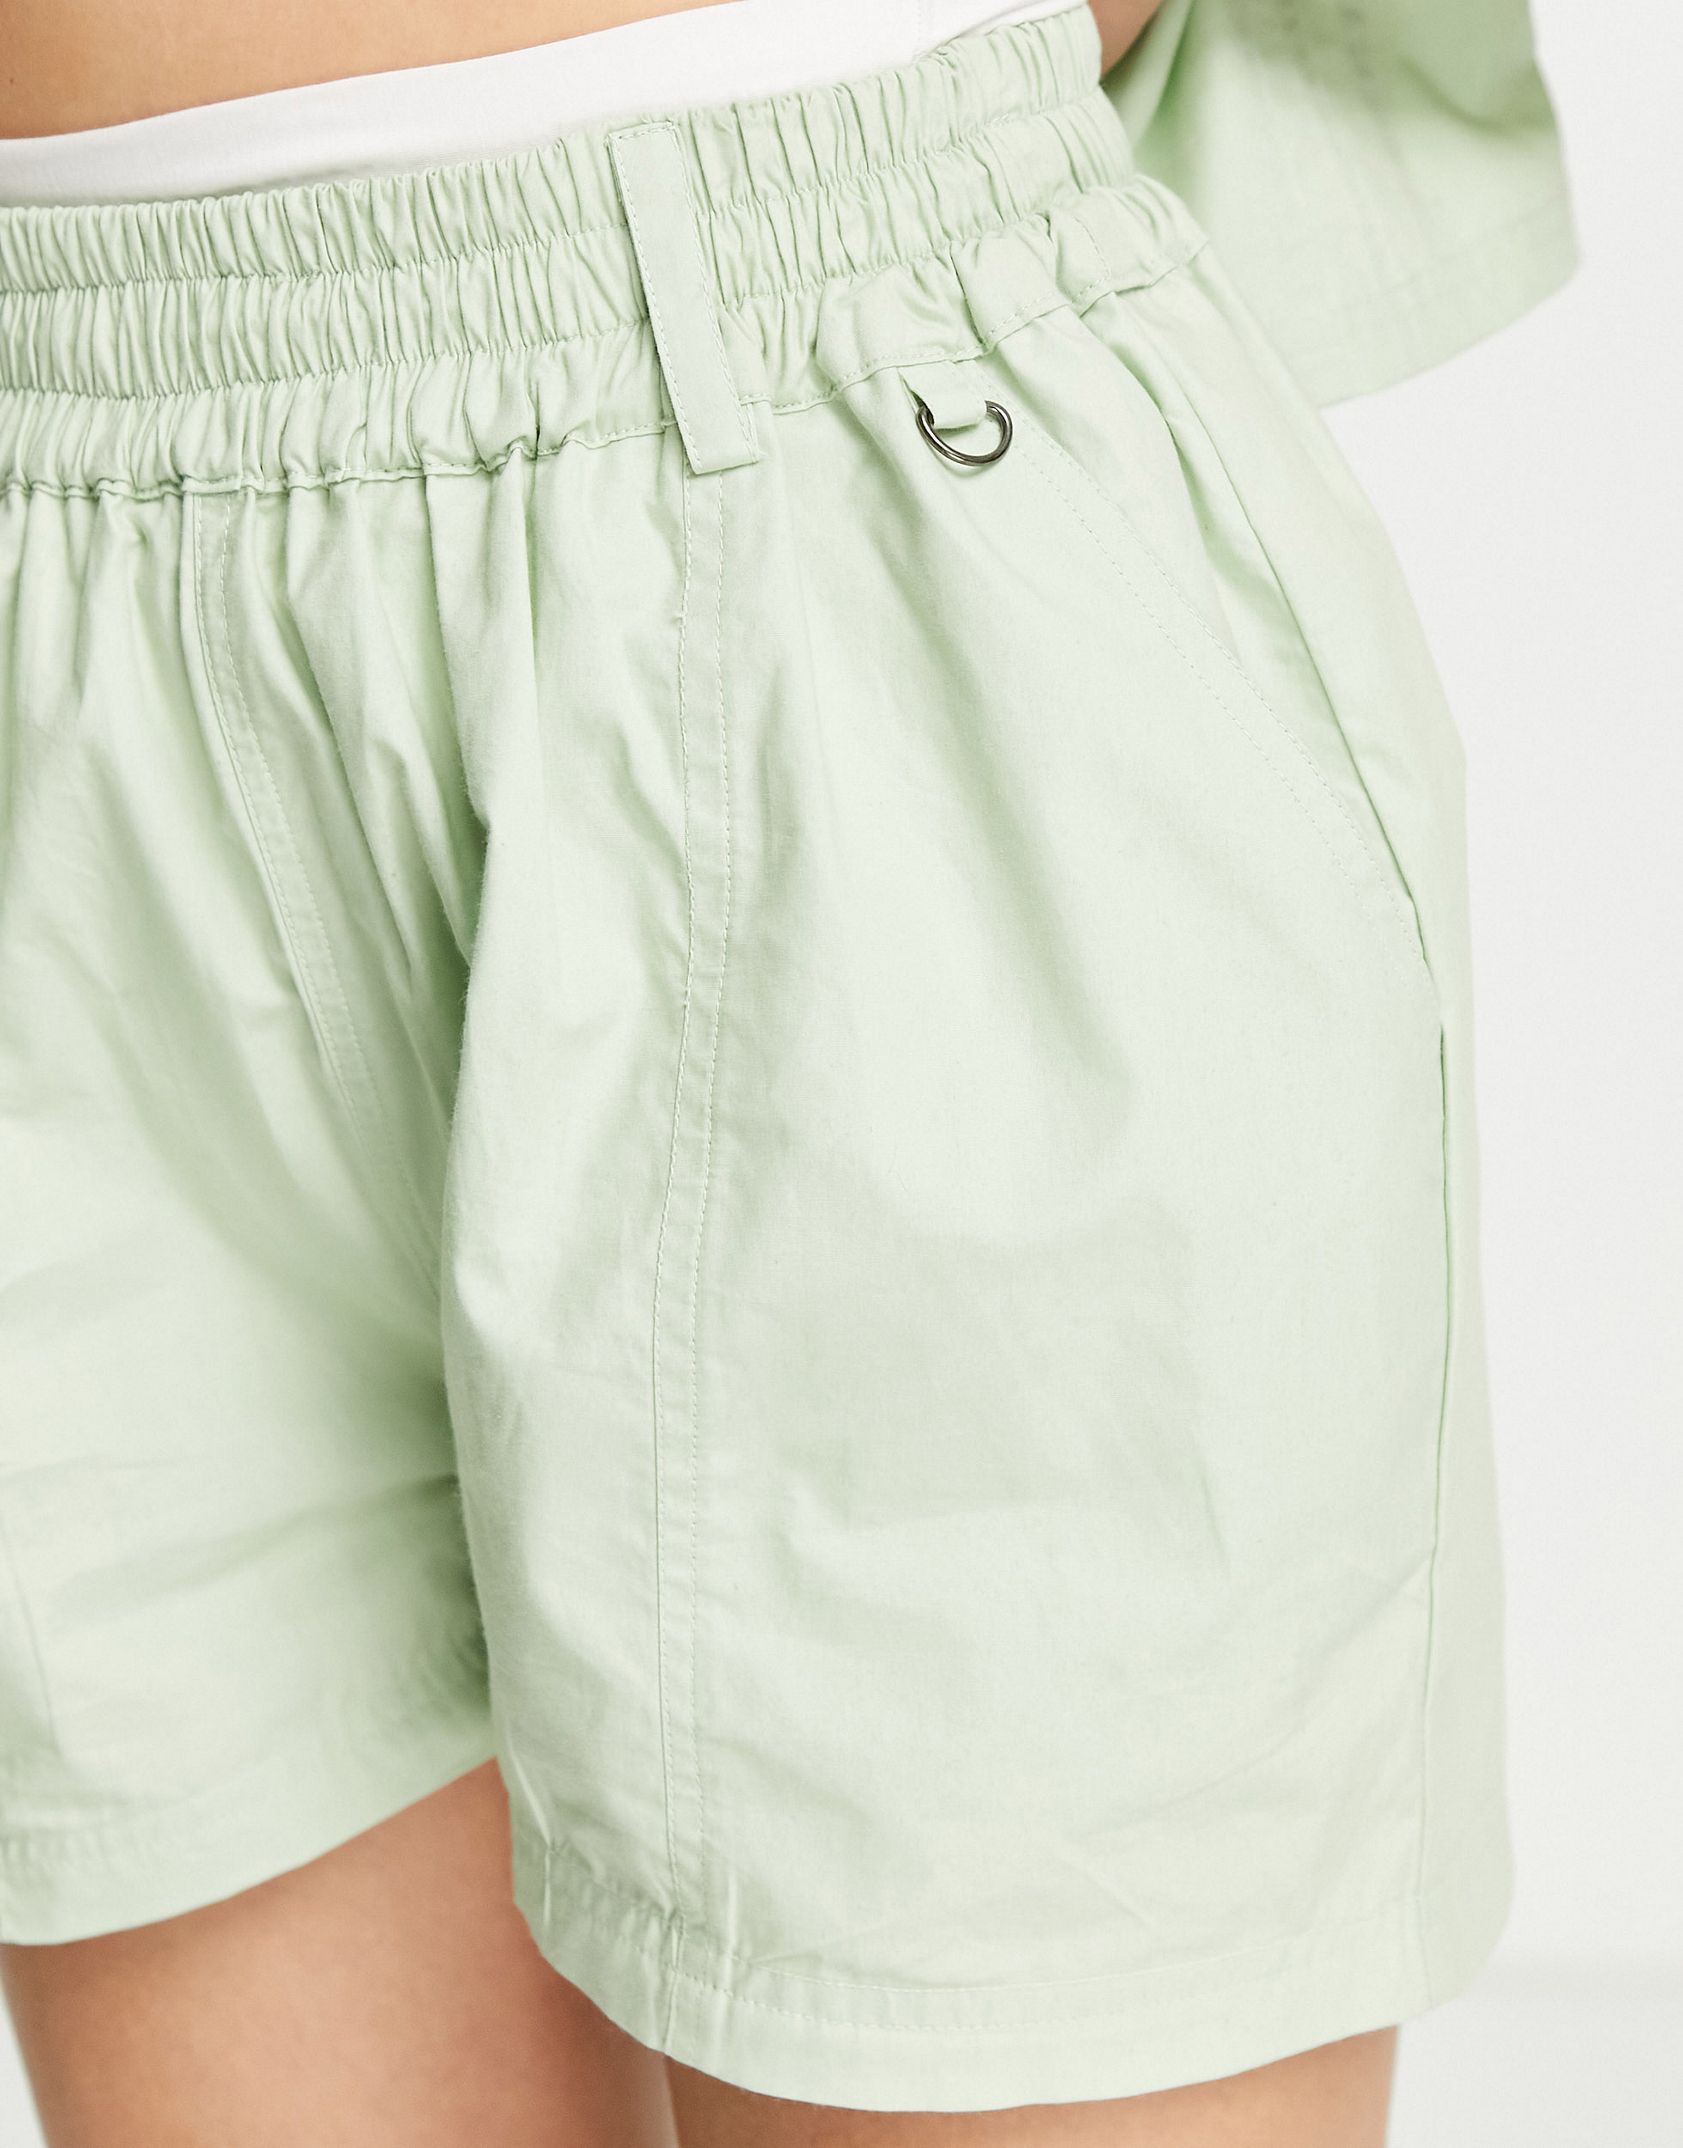 COLLUSION elasticated utility shorts co-ord in sage green -  Price Checker